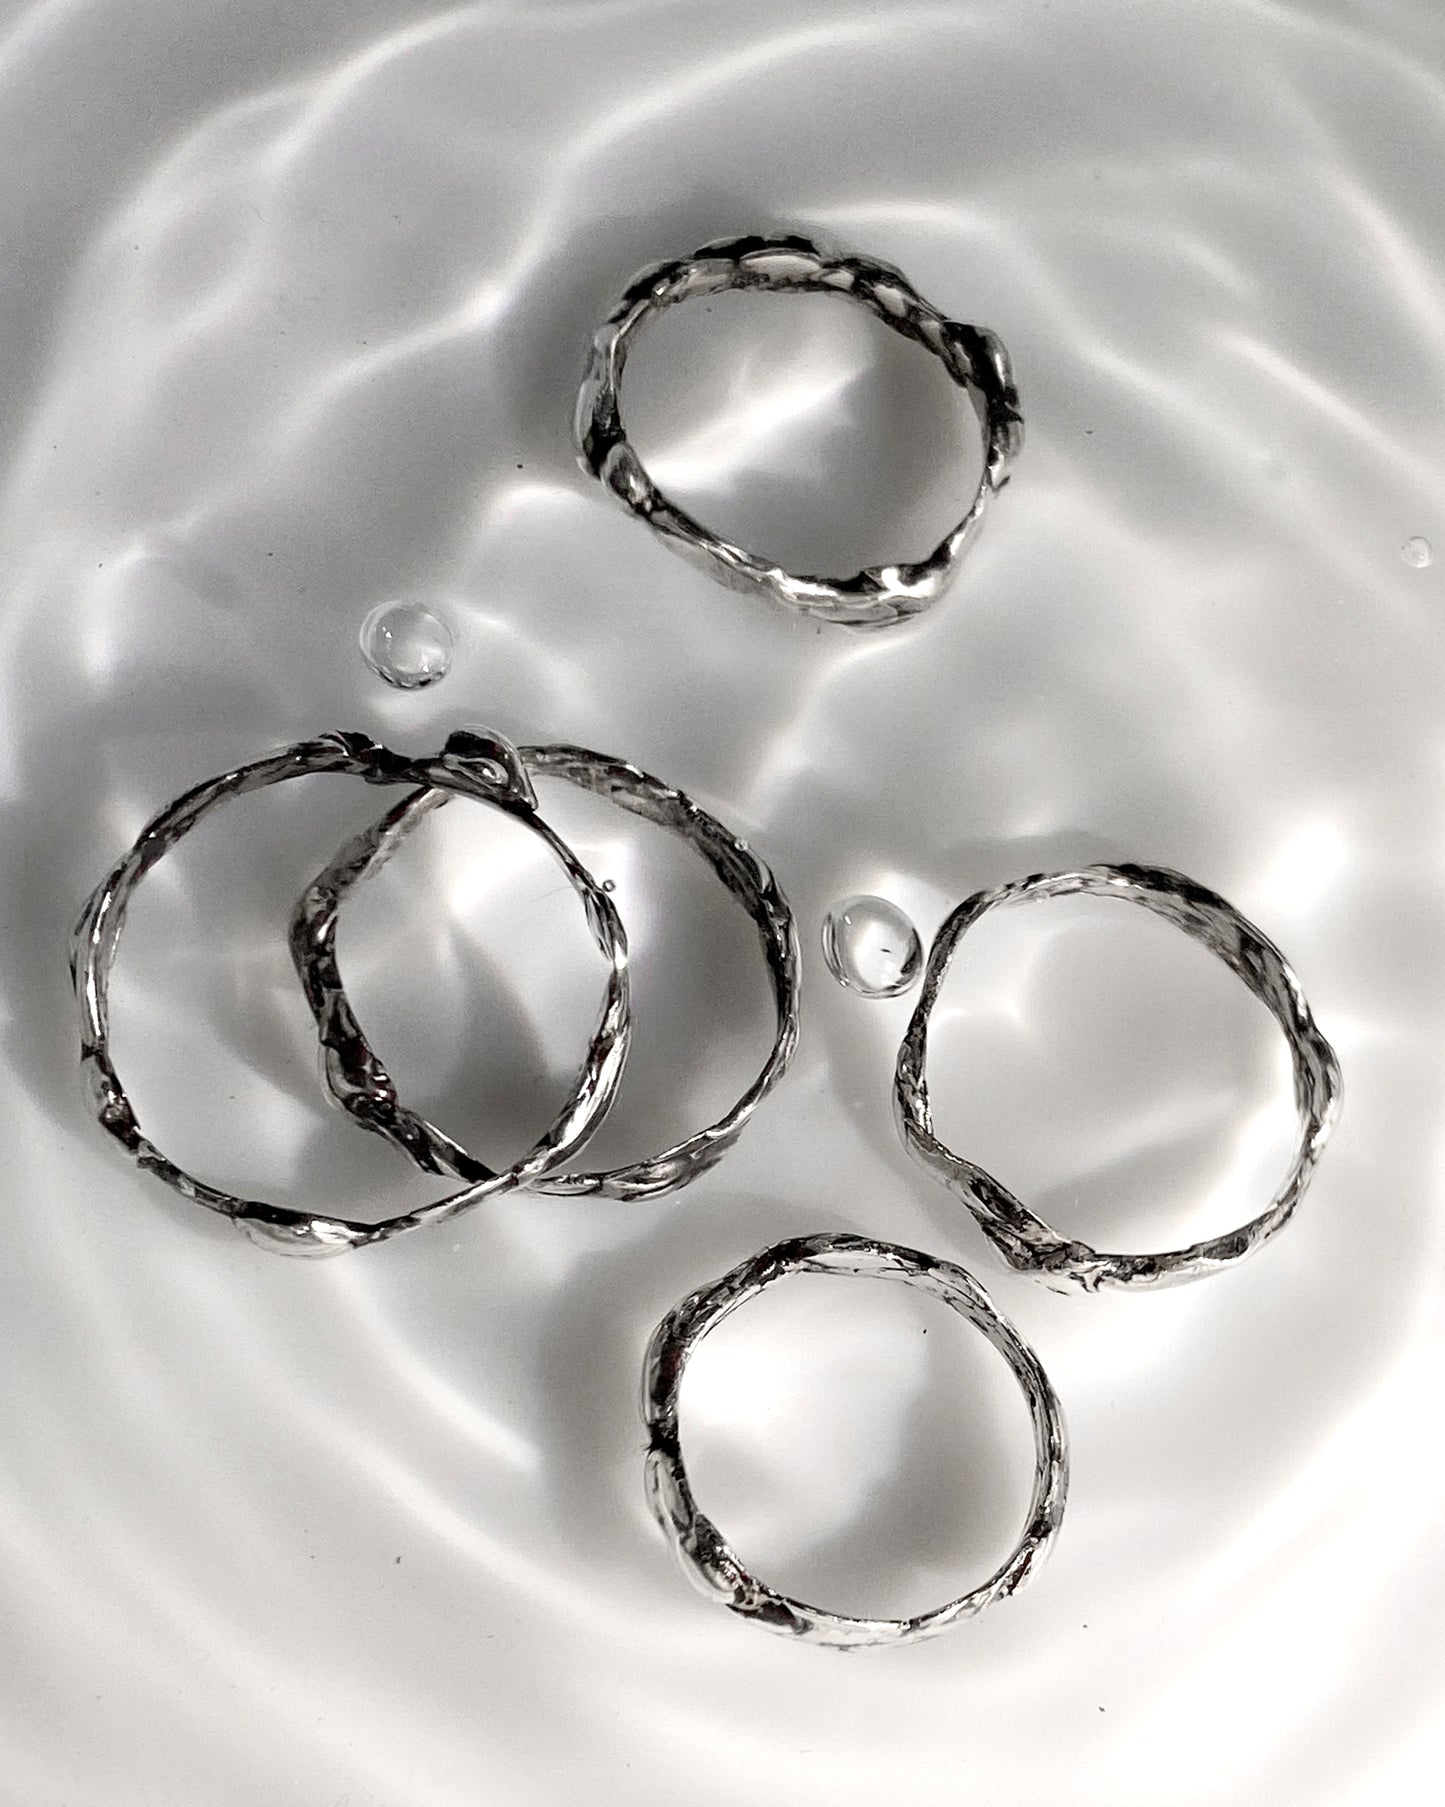 5 silver molten rings dropped in water